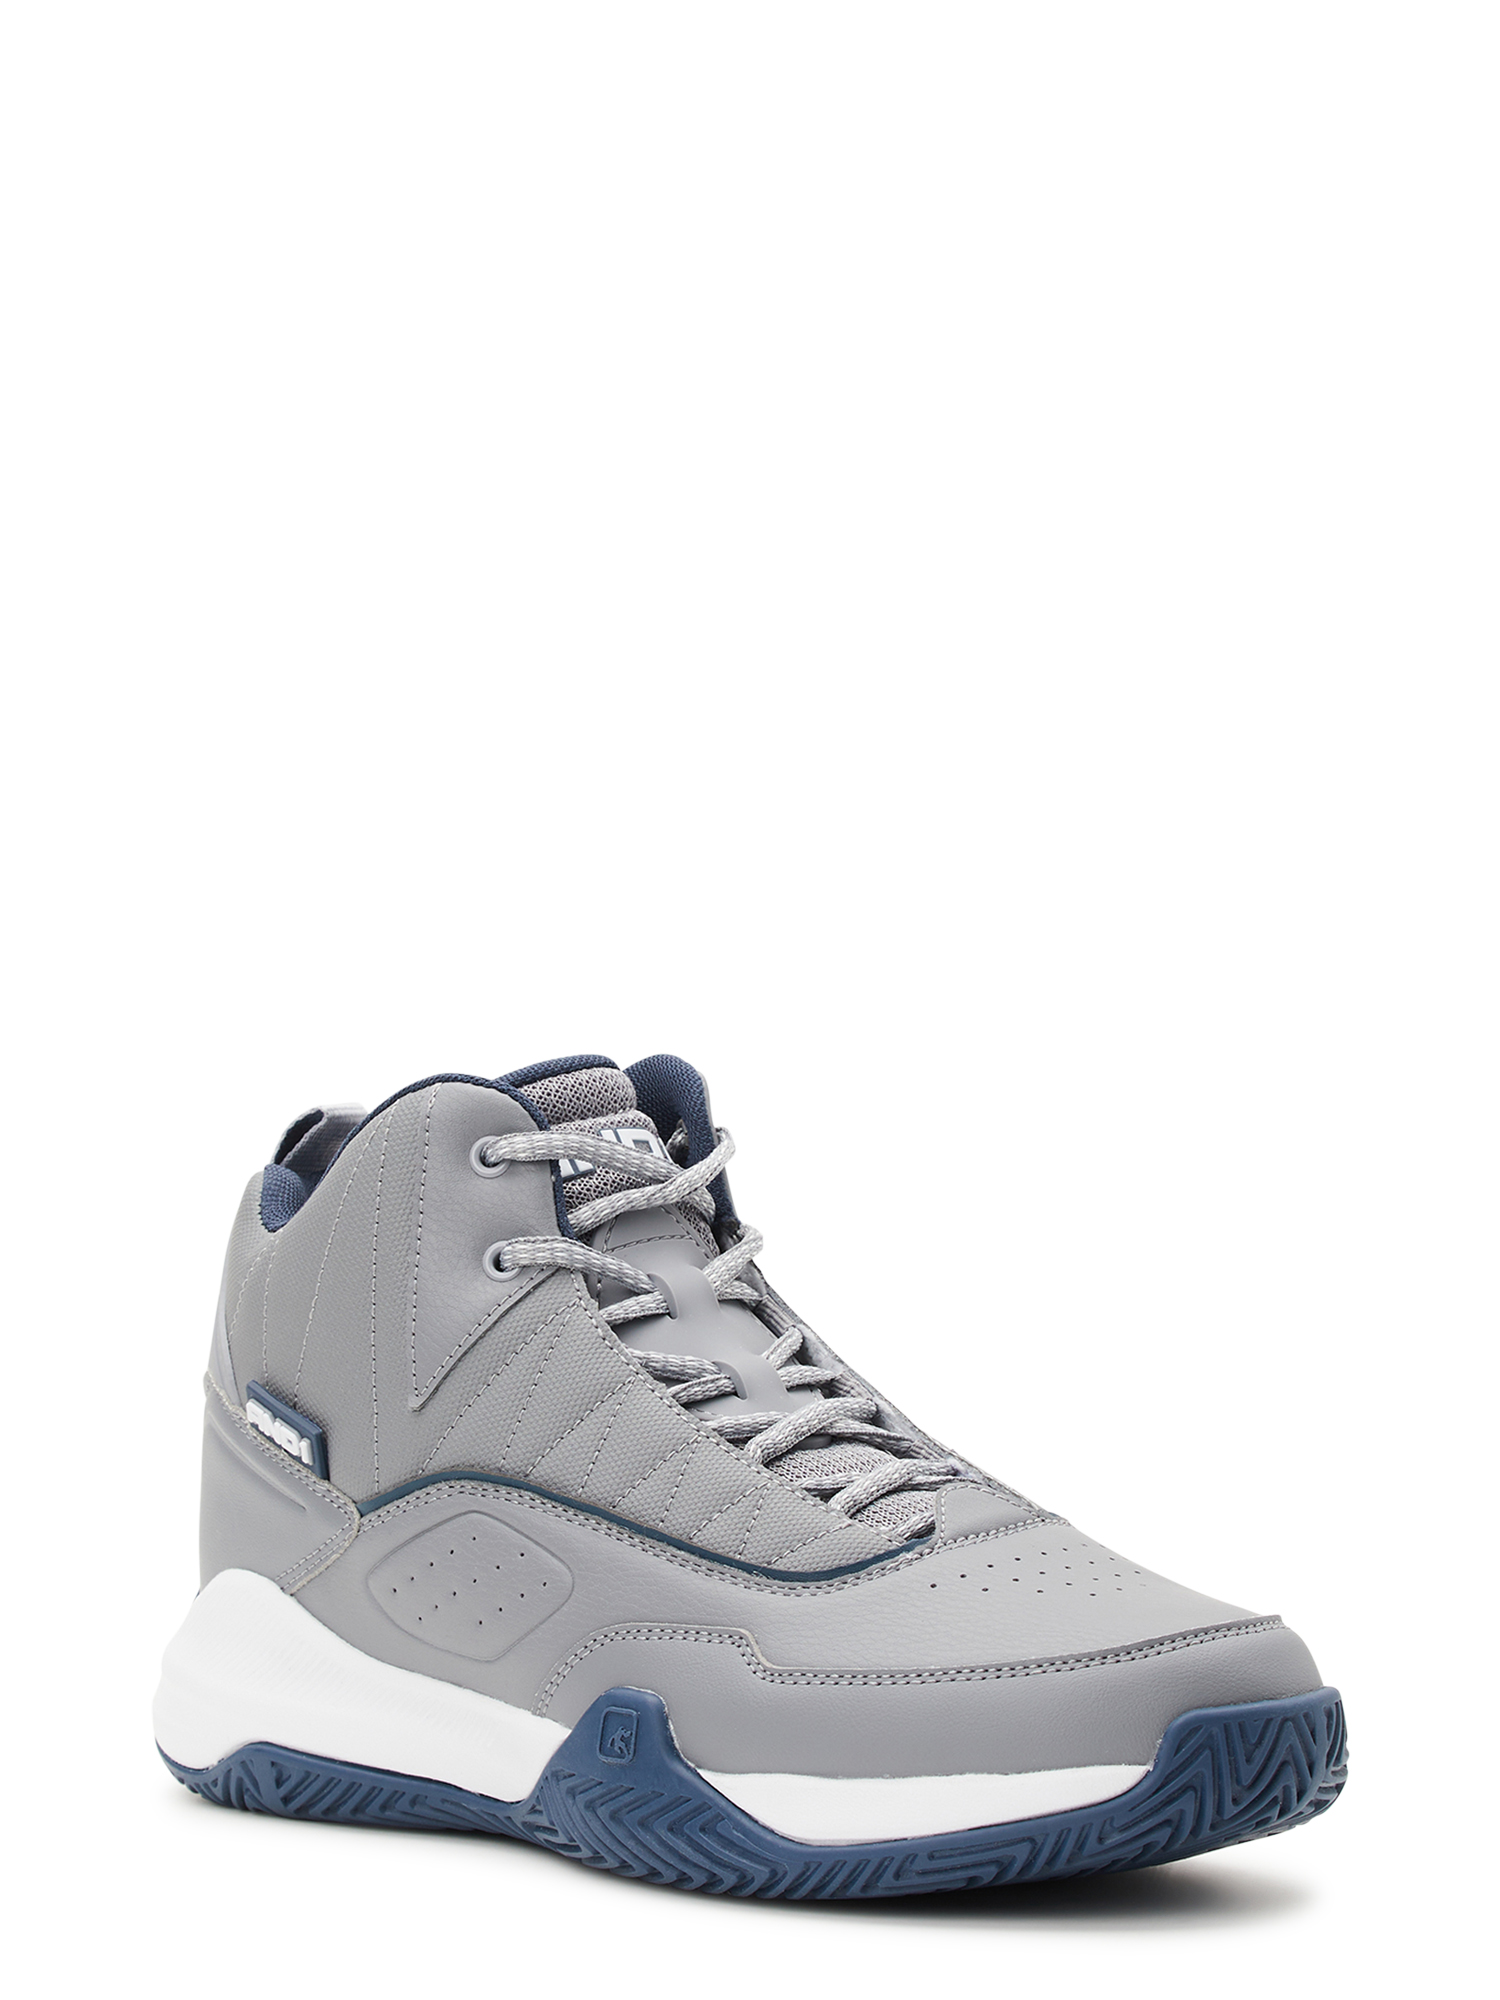 AND1 Men’s Streetball Basketball High-Top Sneakers - image 1 of 7